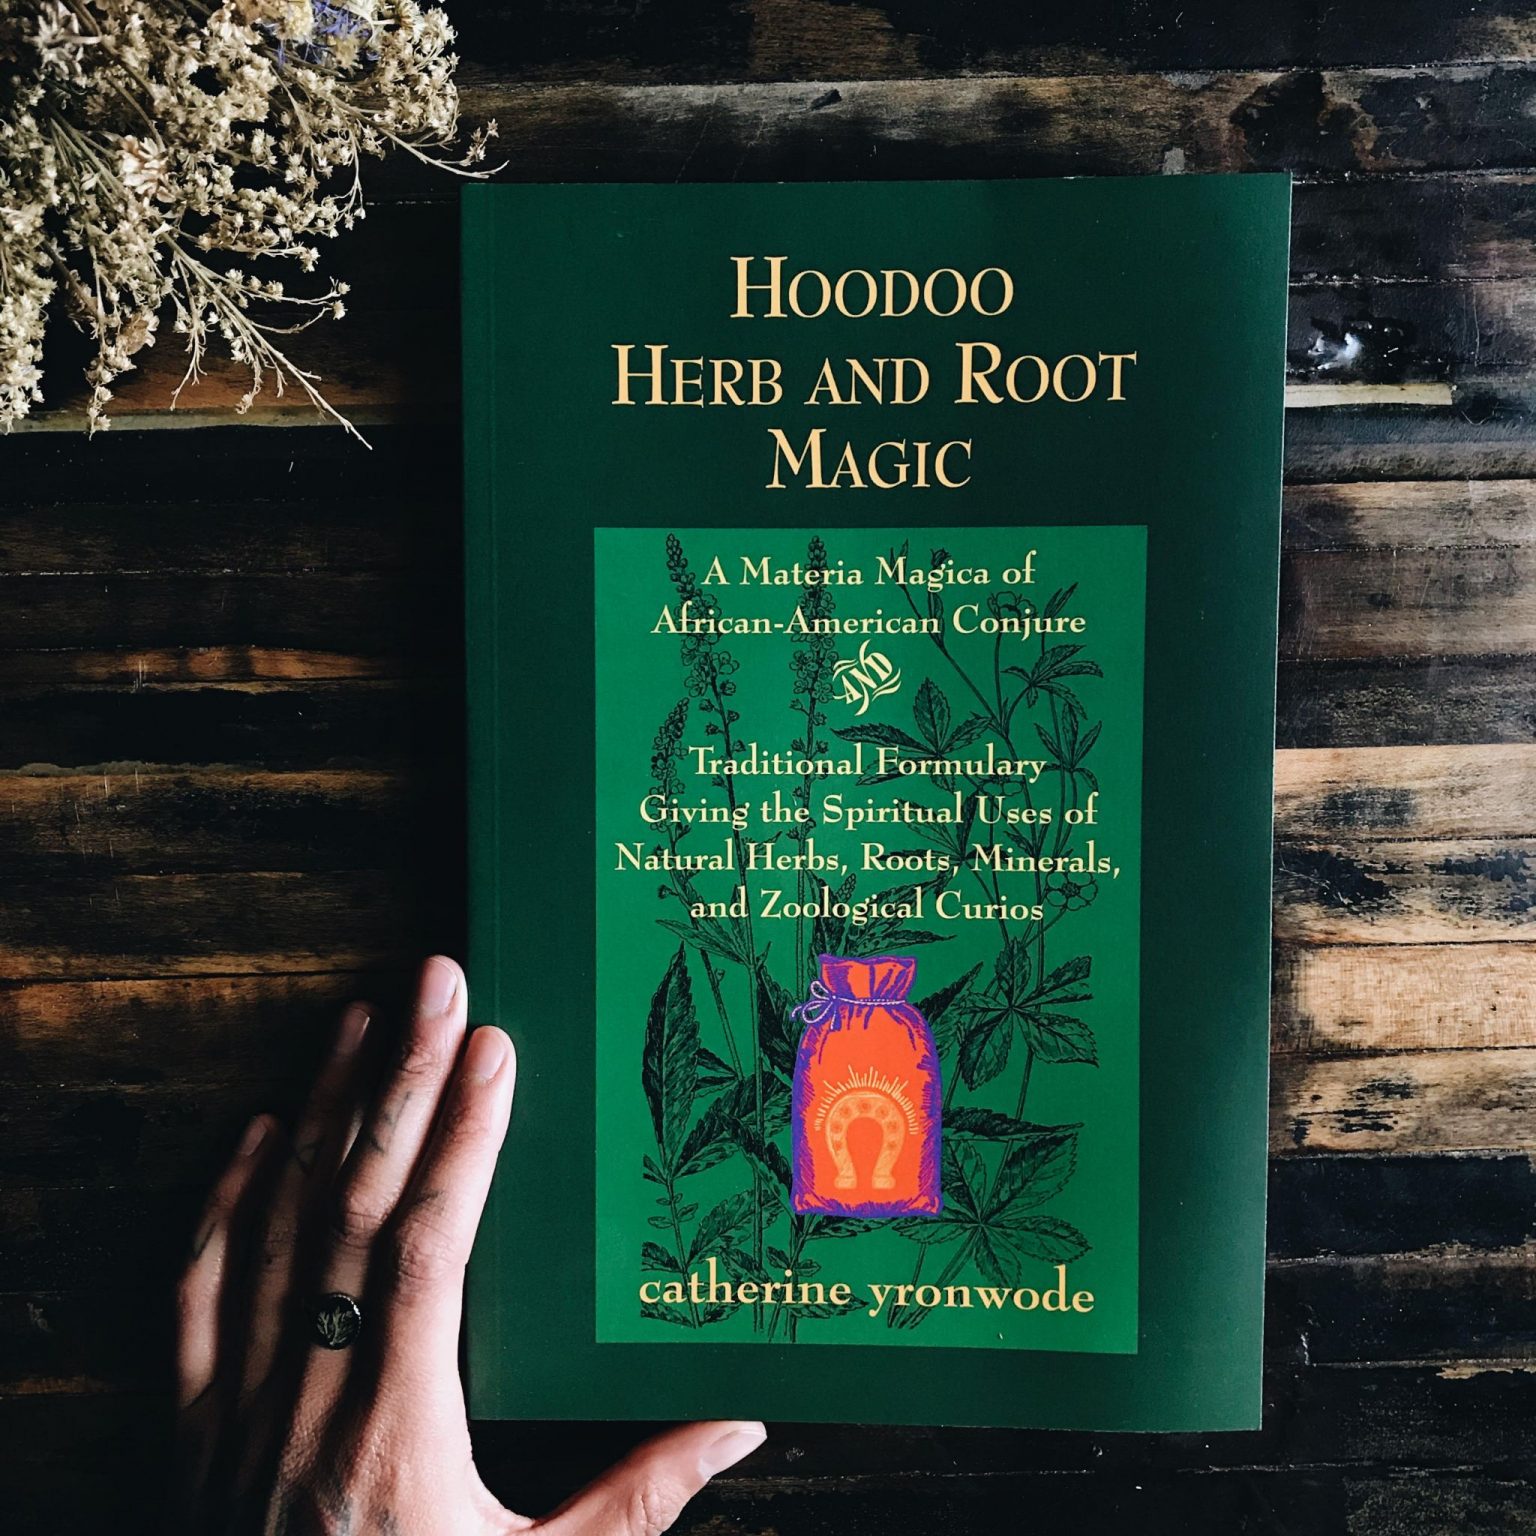 Hoodoo Herb and Root Magic A Materia Magica of AfricanAmerican Conjure. By Catherine Yronwode